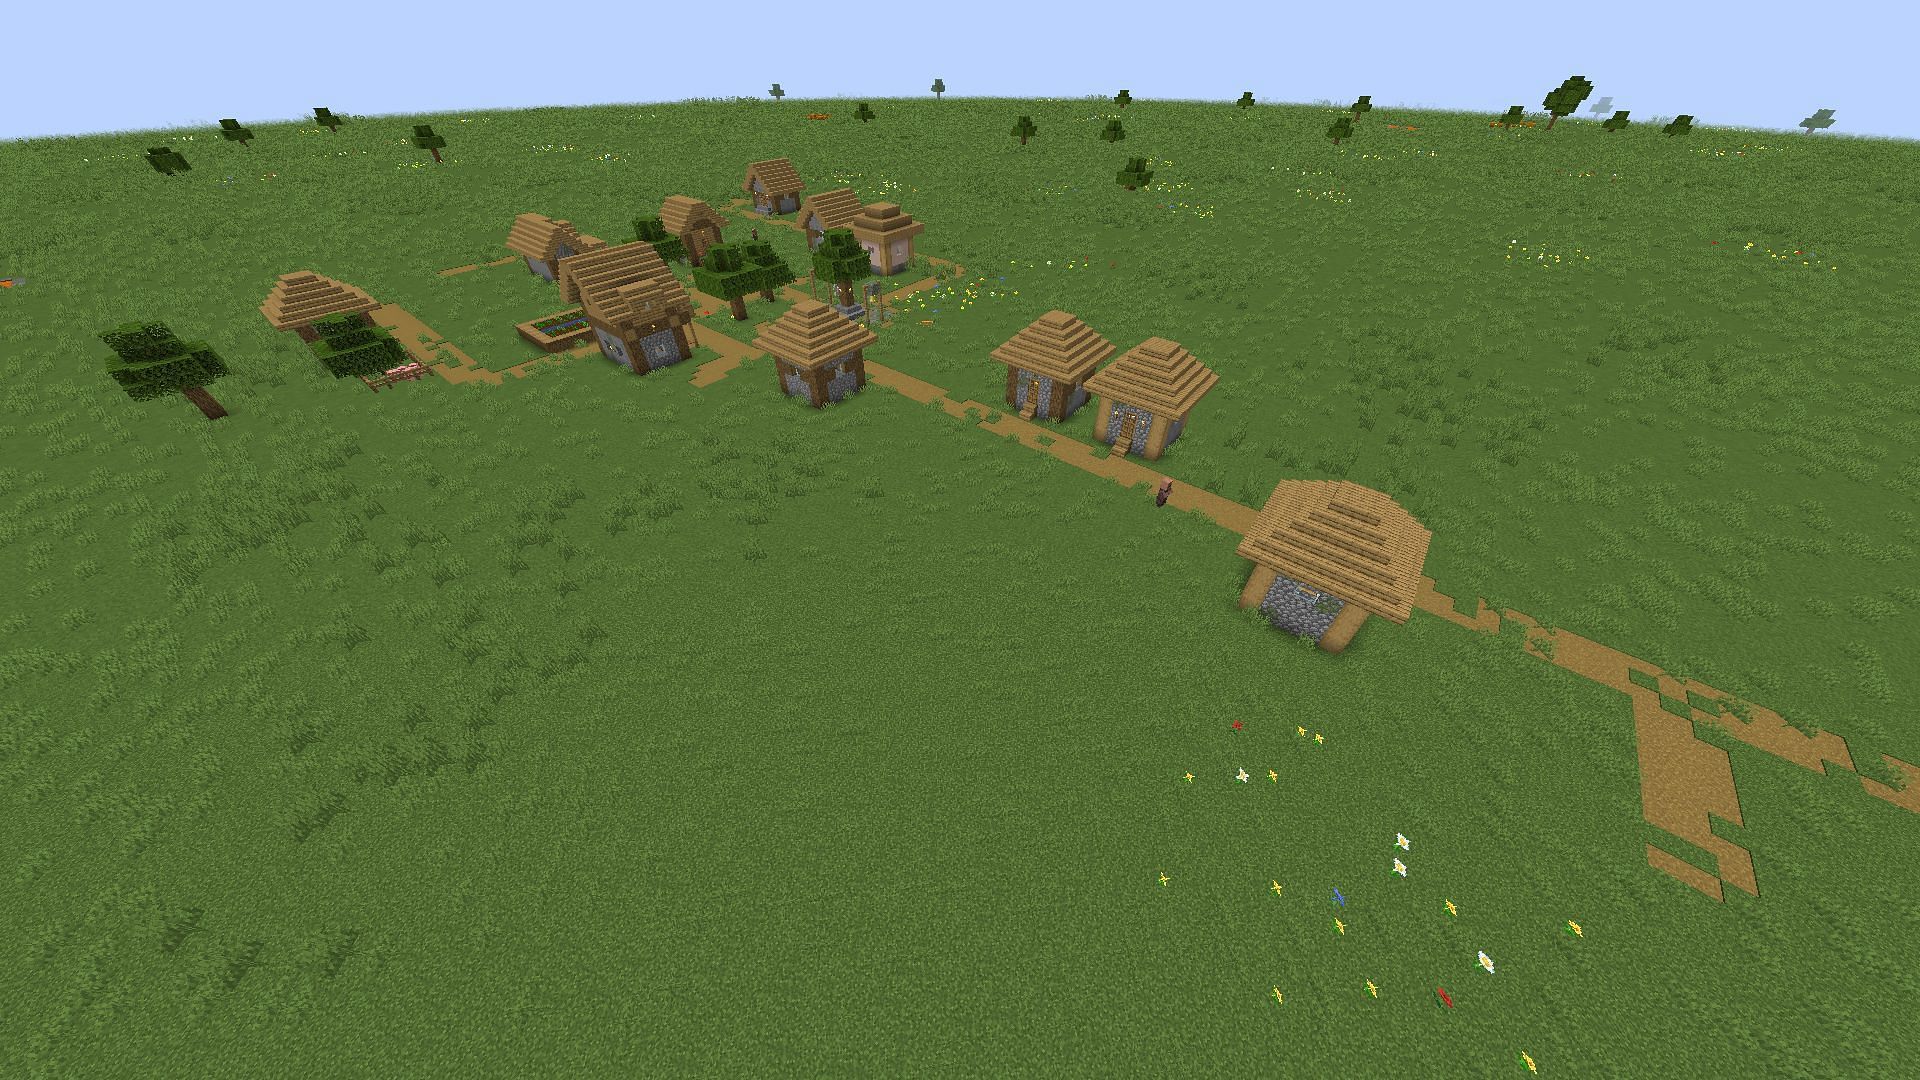 Villages are the best structures to loot and obtain basic resources in Minecraft (Image via Mojang)